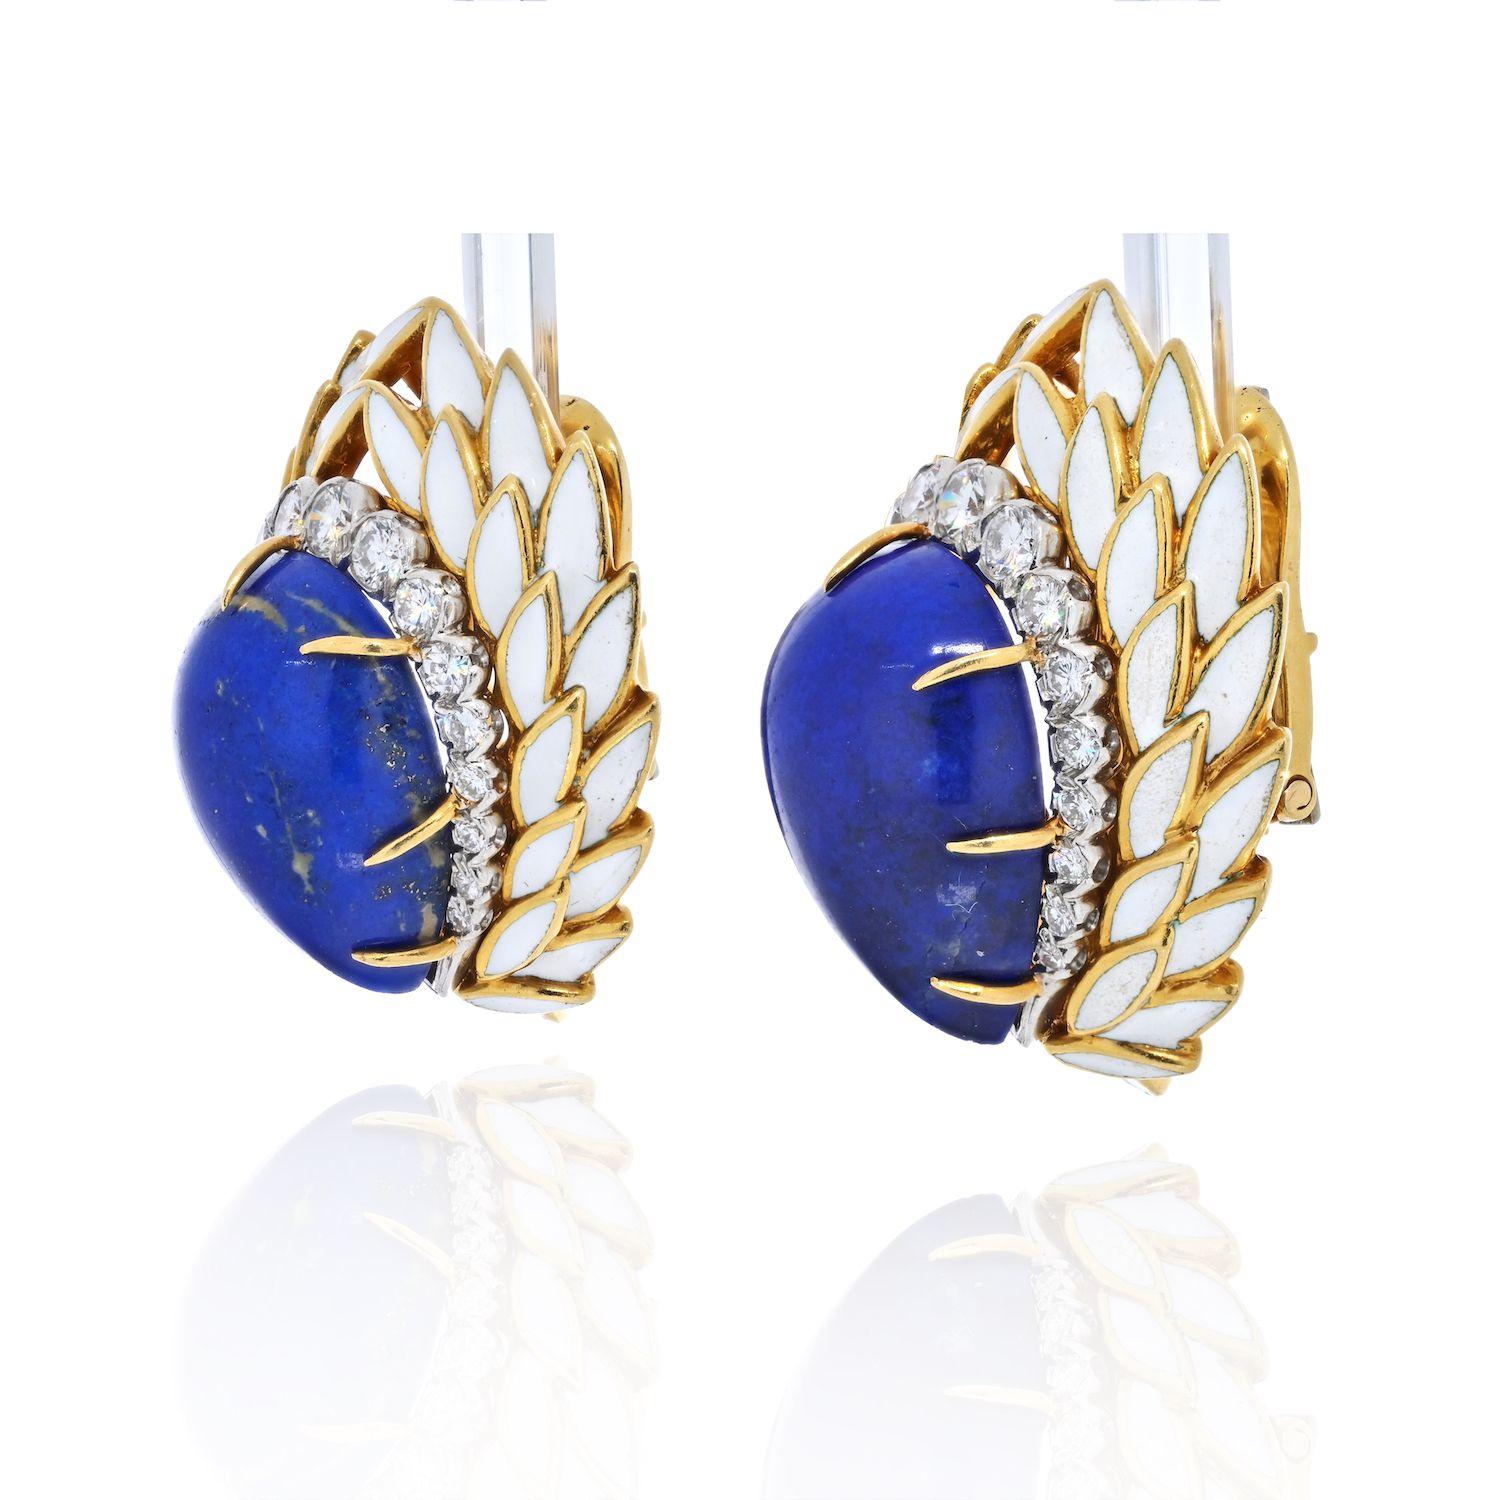 These David Webb earrings have everything a vintage Webb jewel can offer: color, dimension, style, design, contrast, age. The carved gem-quality lapis lazuli pear cut cabochons held within yellow gold and opaque white enamel lotus petals, accented